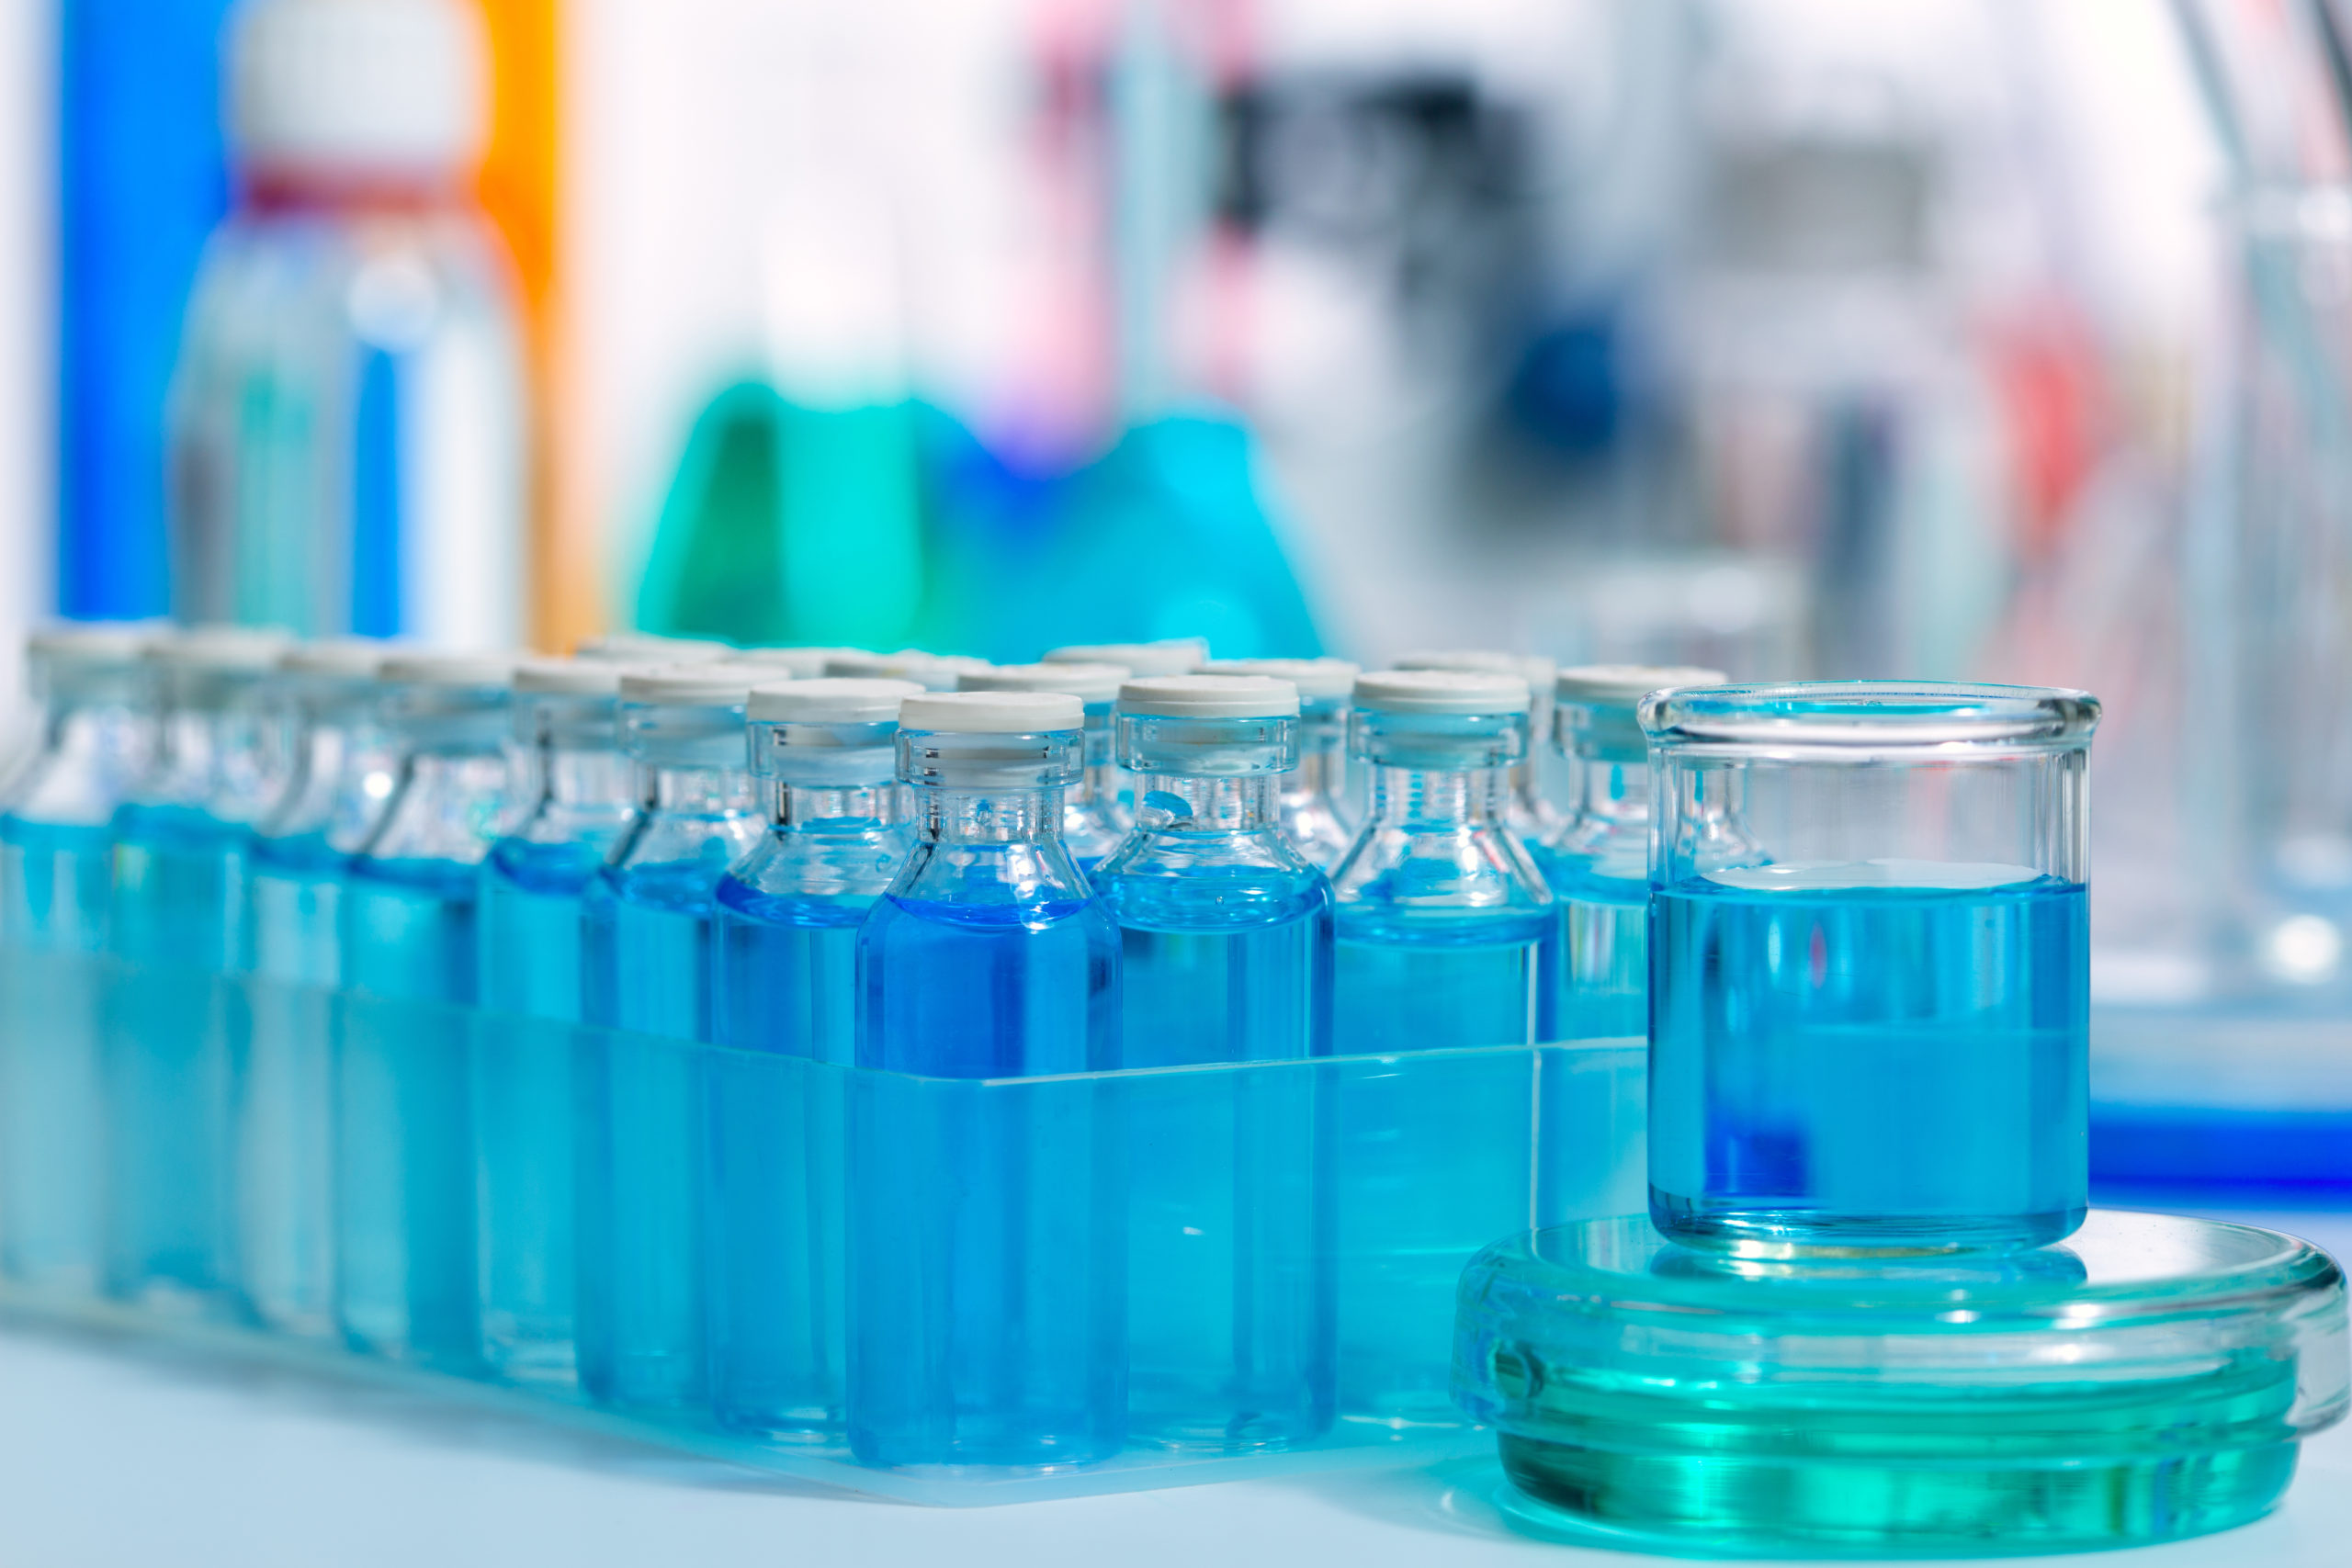 ICYMI: EPA’s IRIS Program is Ramping up its Activity for chemicals, including PFAS; EPA’s TSCA Program Releases Guidance for Exemptions to CDR Reporting